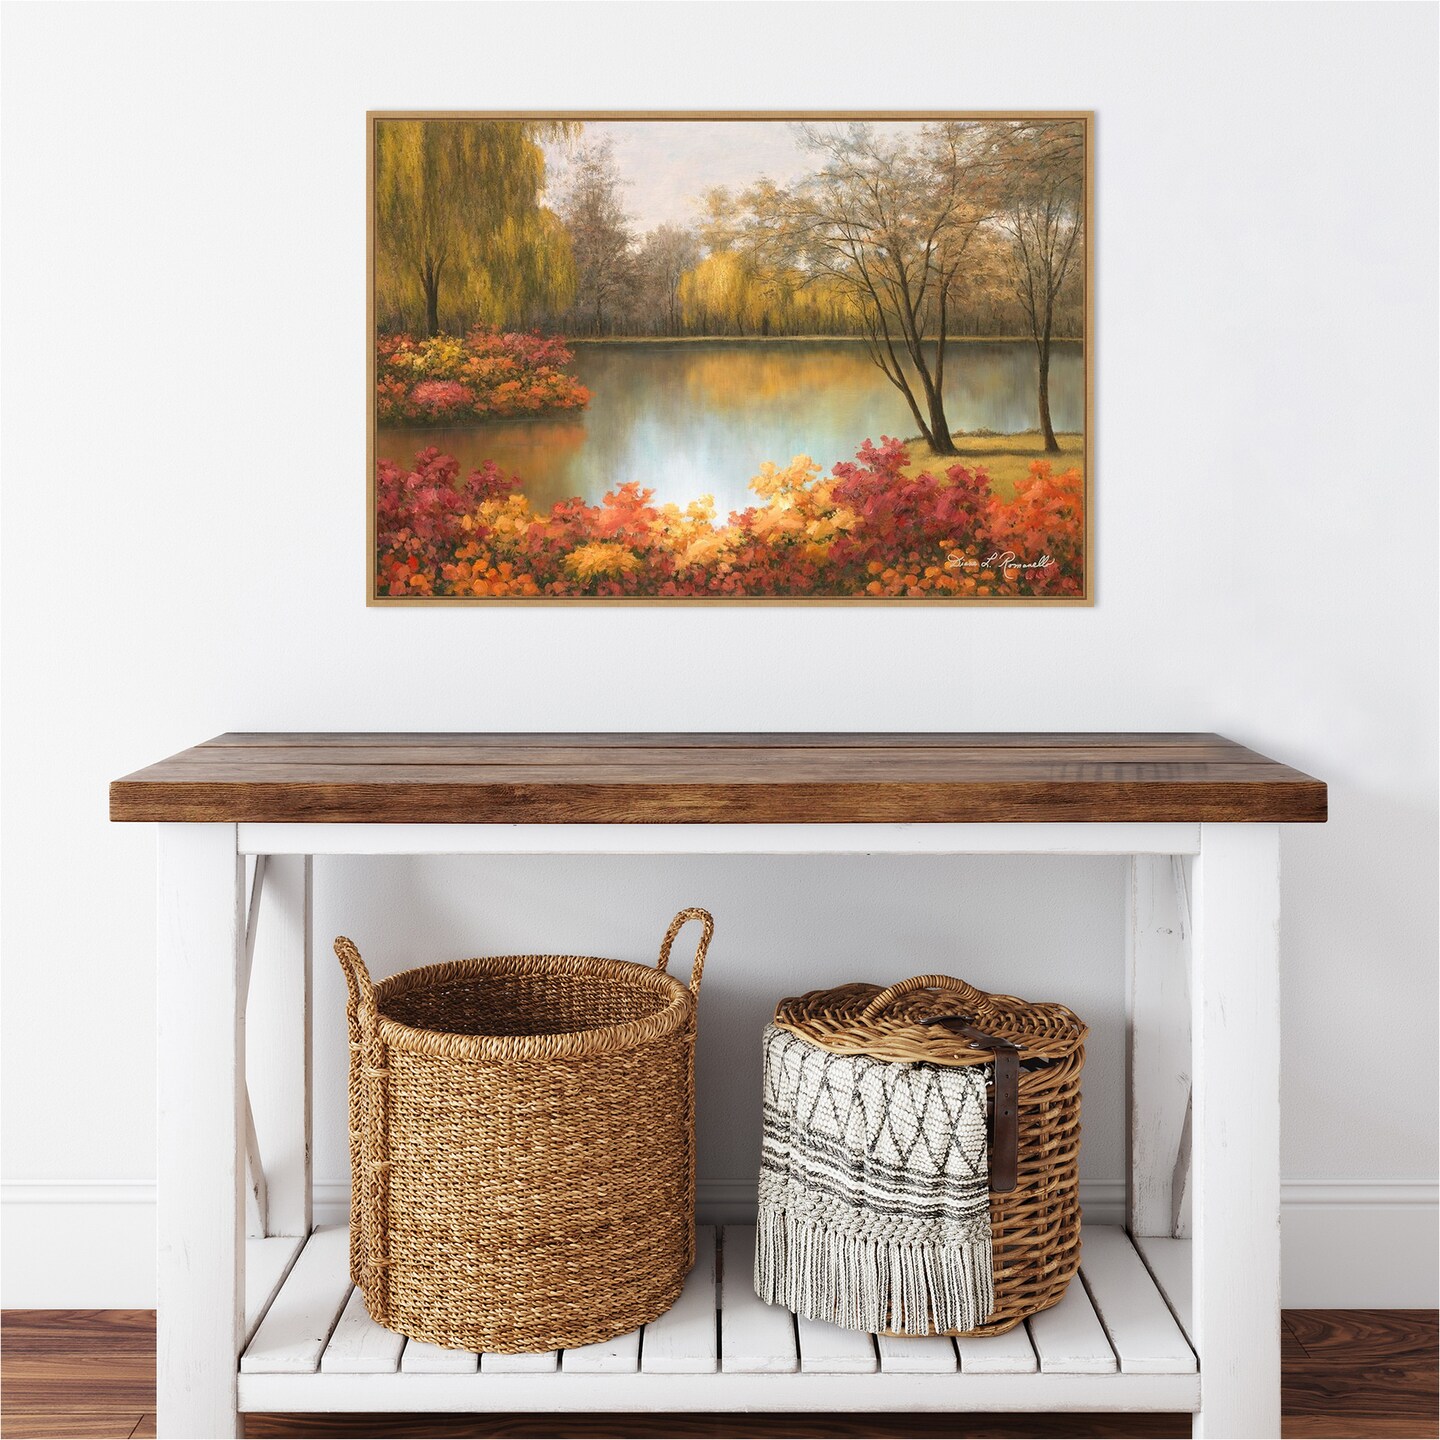 Autumn Palette by Diane Romanello 33-in. W x 23-in. H. Canvas Wall Art Print Framed in Natural